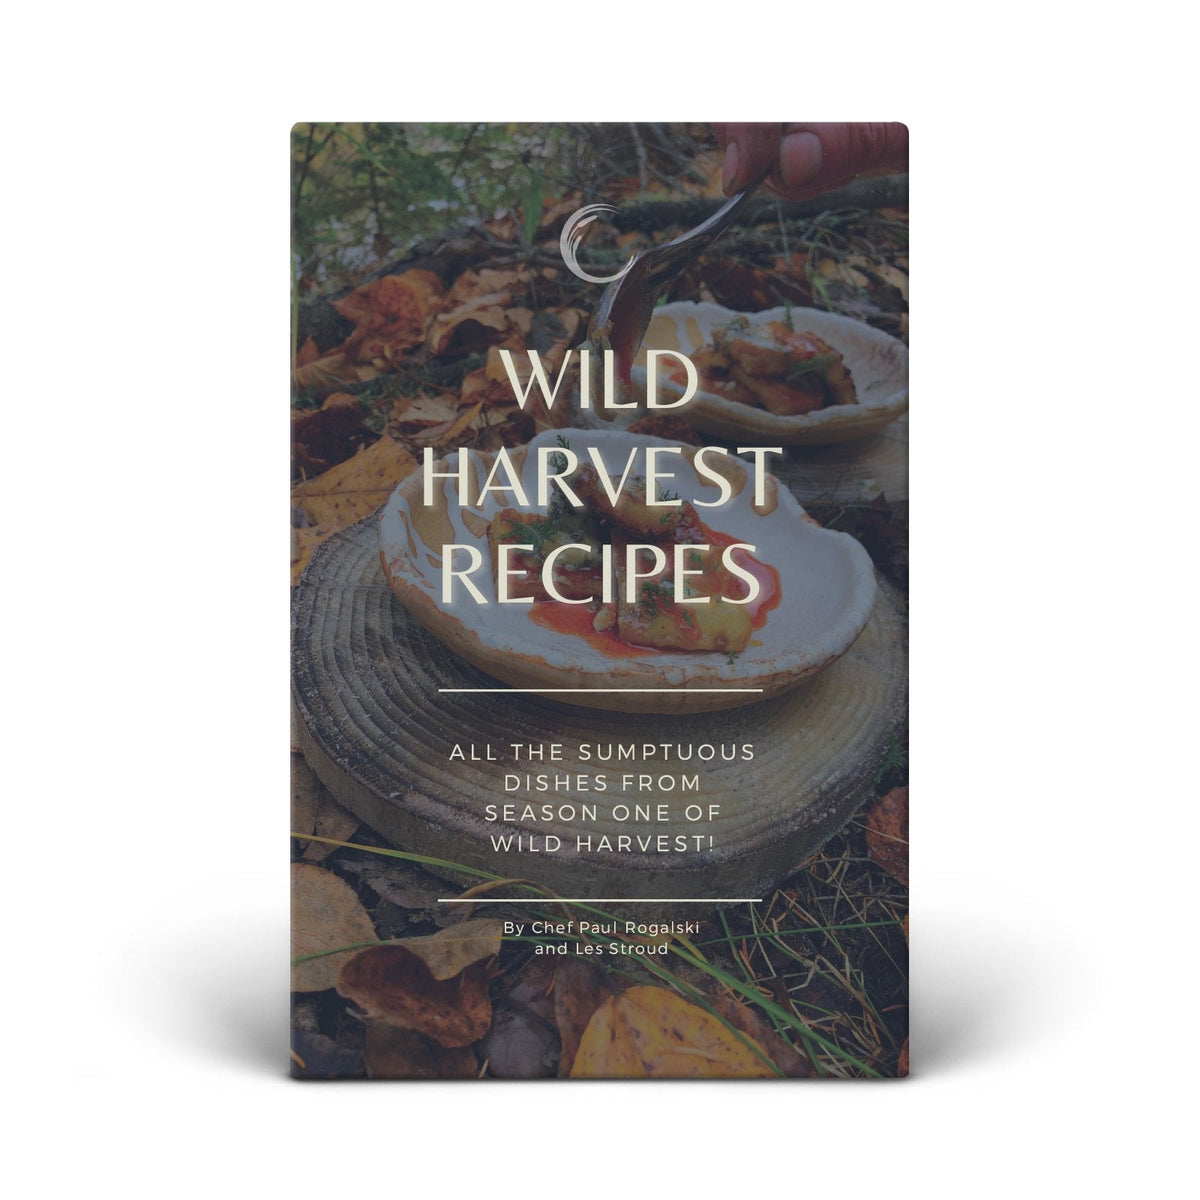 Wild Harvest Recipes: All the Sumptuous Dishes from Season One of Wild Harvest